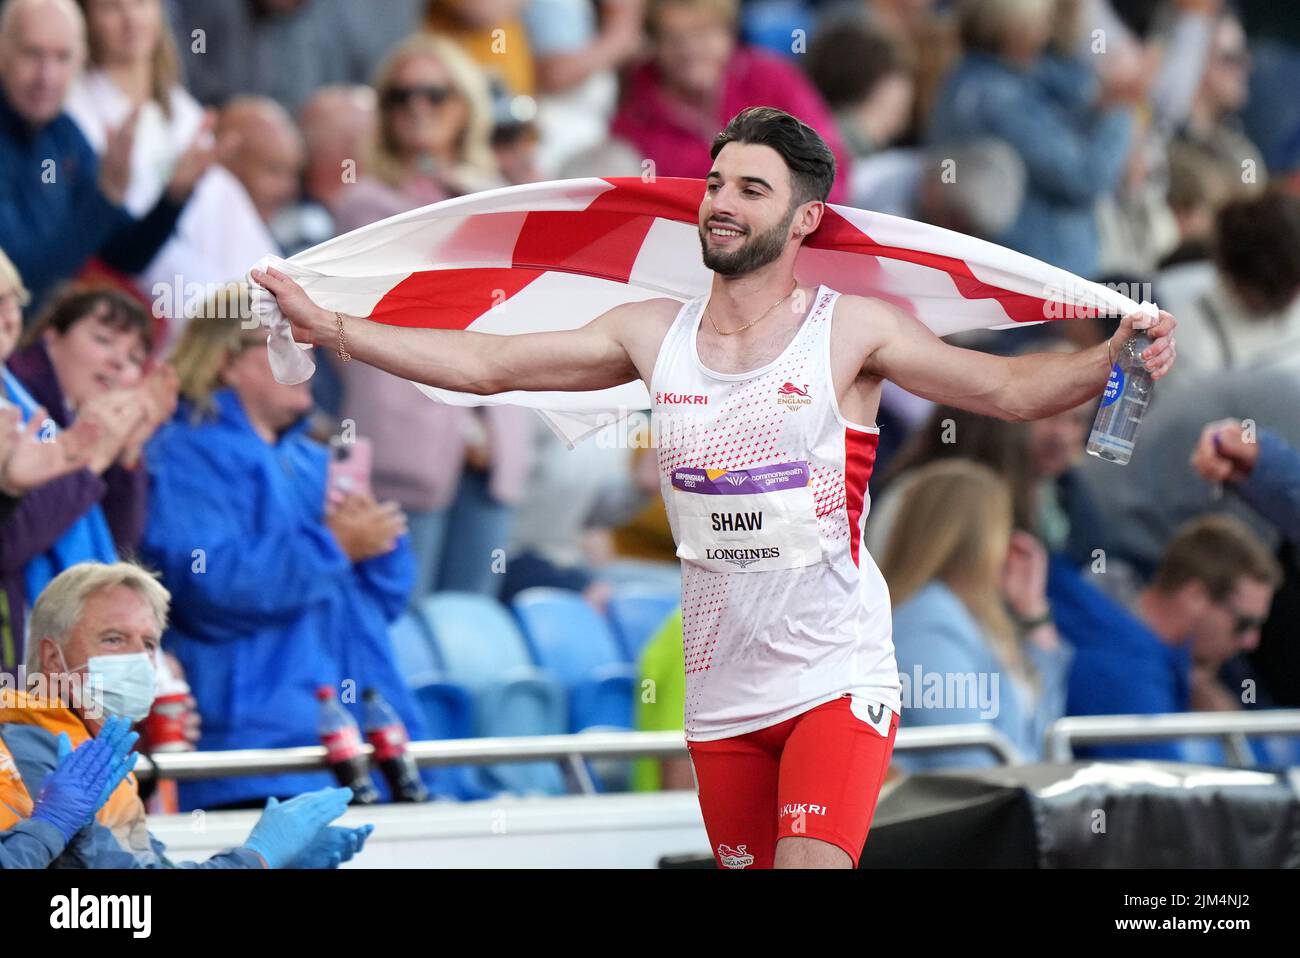 England's Zachary Alexander Shaw celebrates taking silver after the Men's T11/12 100m Final at Alexander Stadium on day seven of the 2022 Commonwealth Games in Birmingham. Picture date: Thursday August 4, 2022. Stock Photo